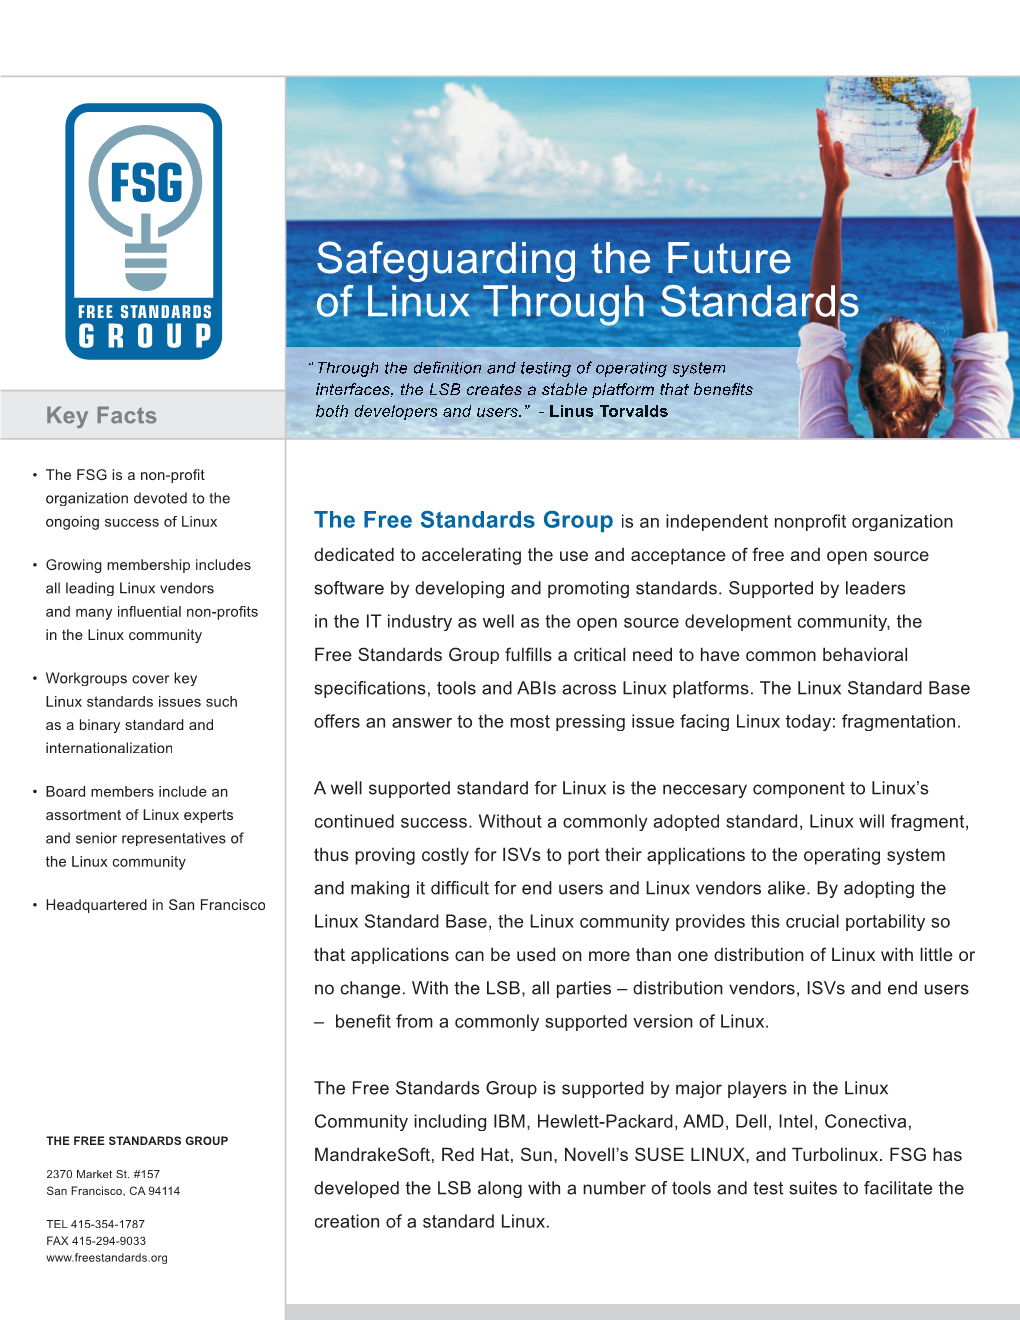 Safeguarding the Future of Linux Through Standards